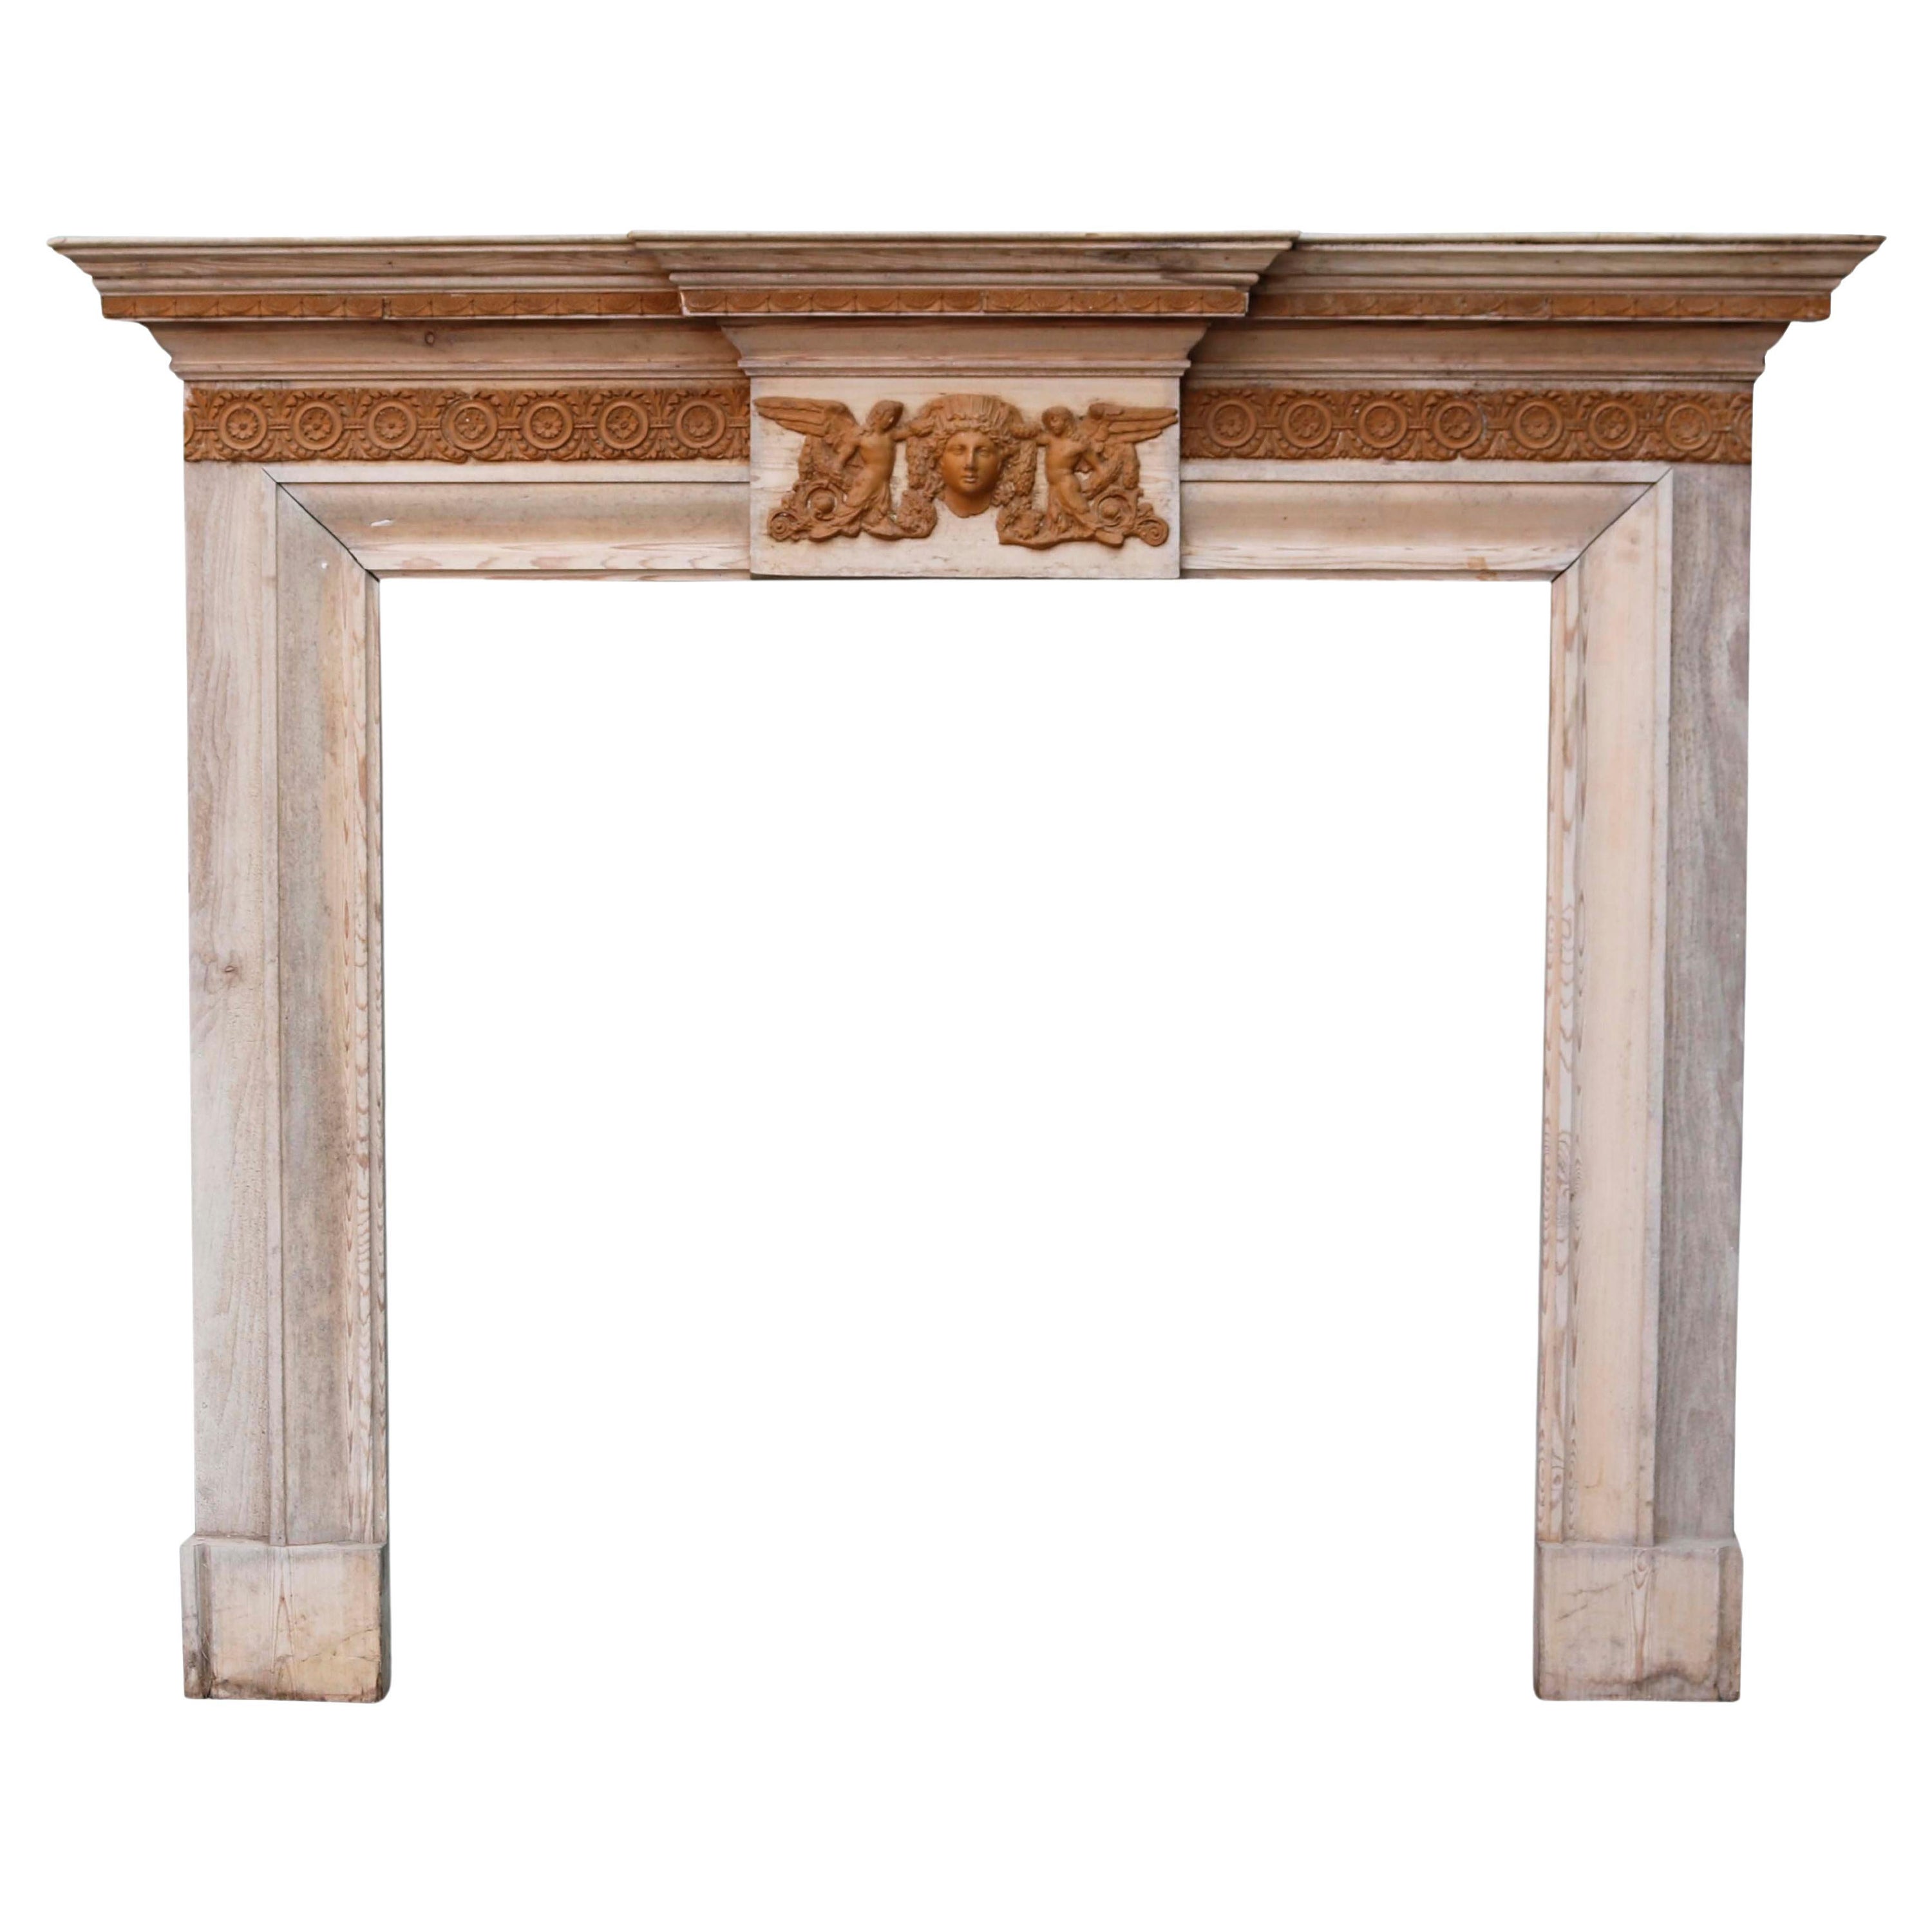 19th Century Fireplace Mantel For Sale